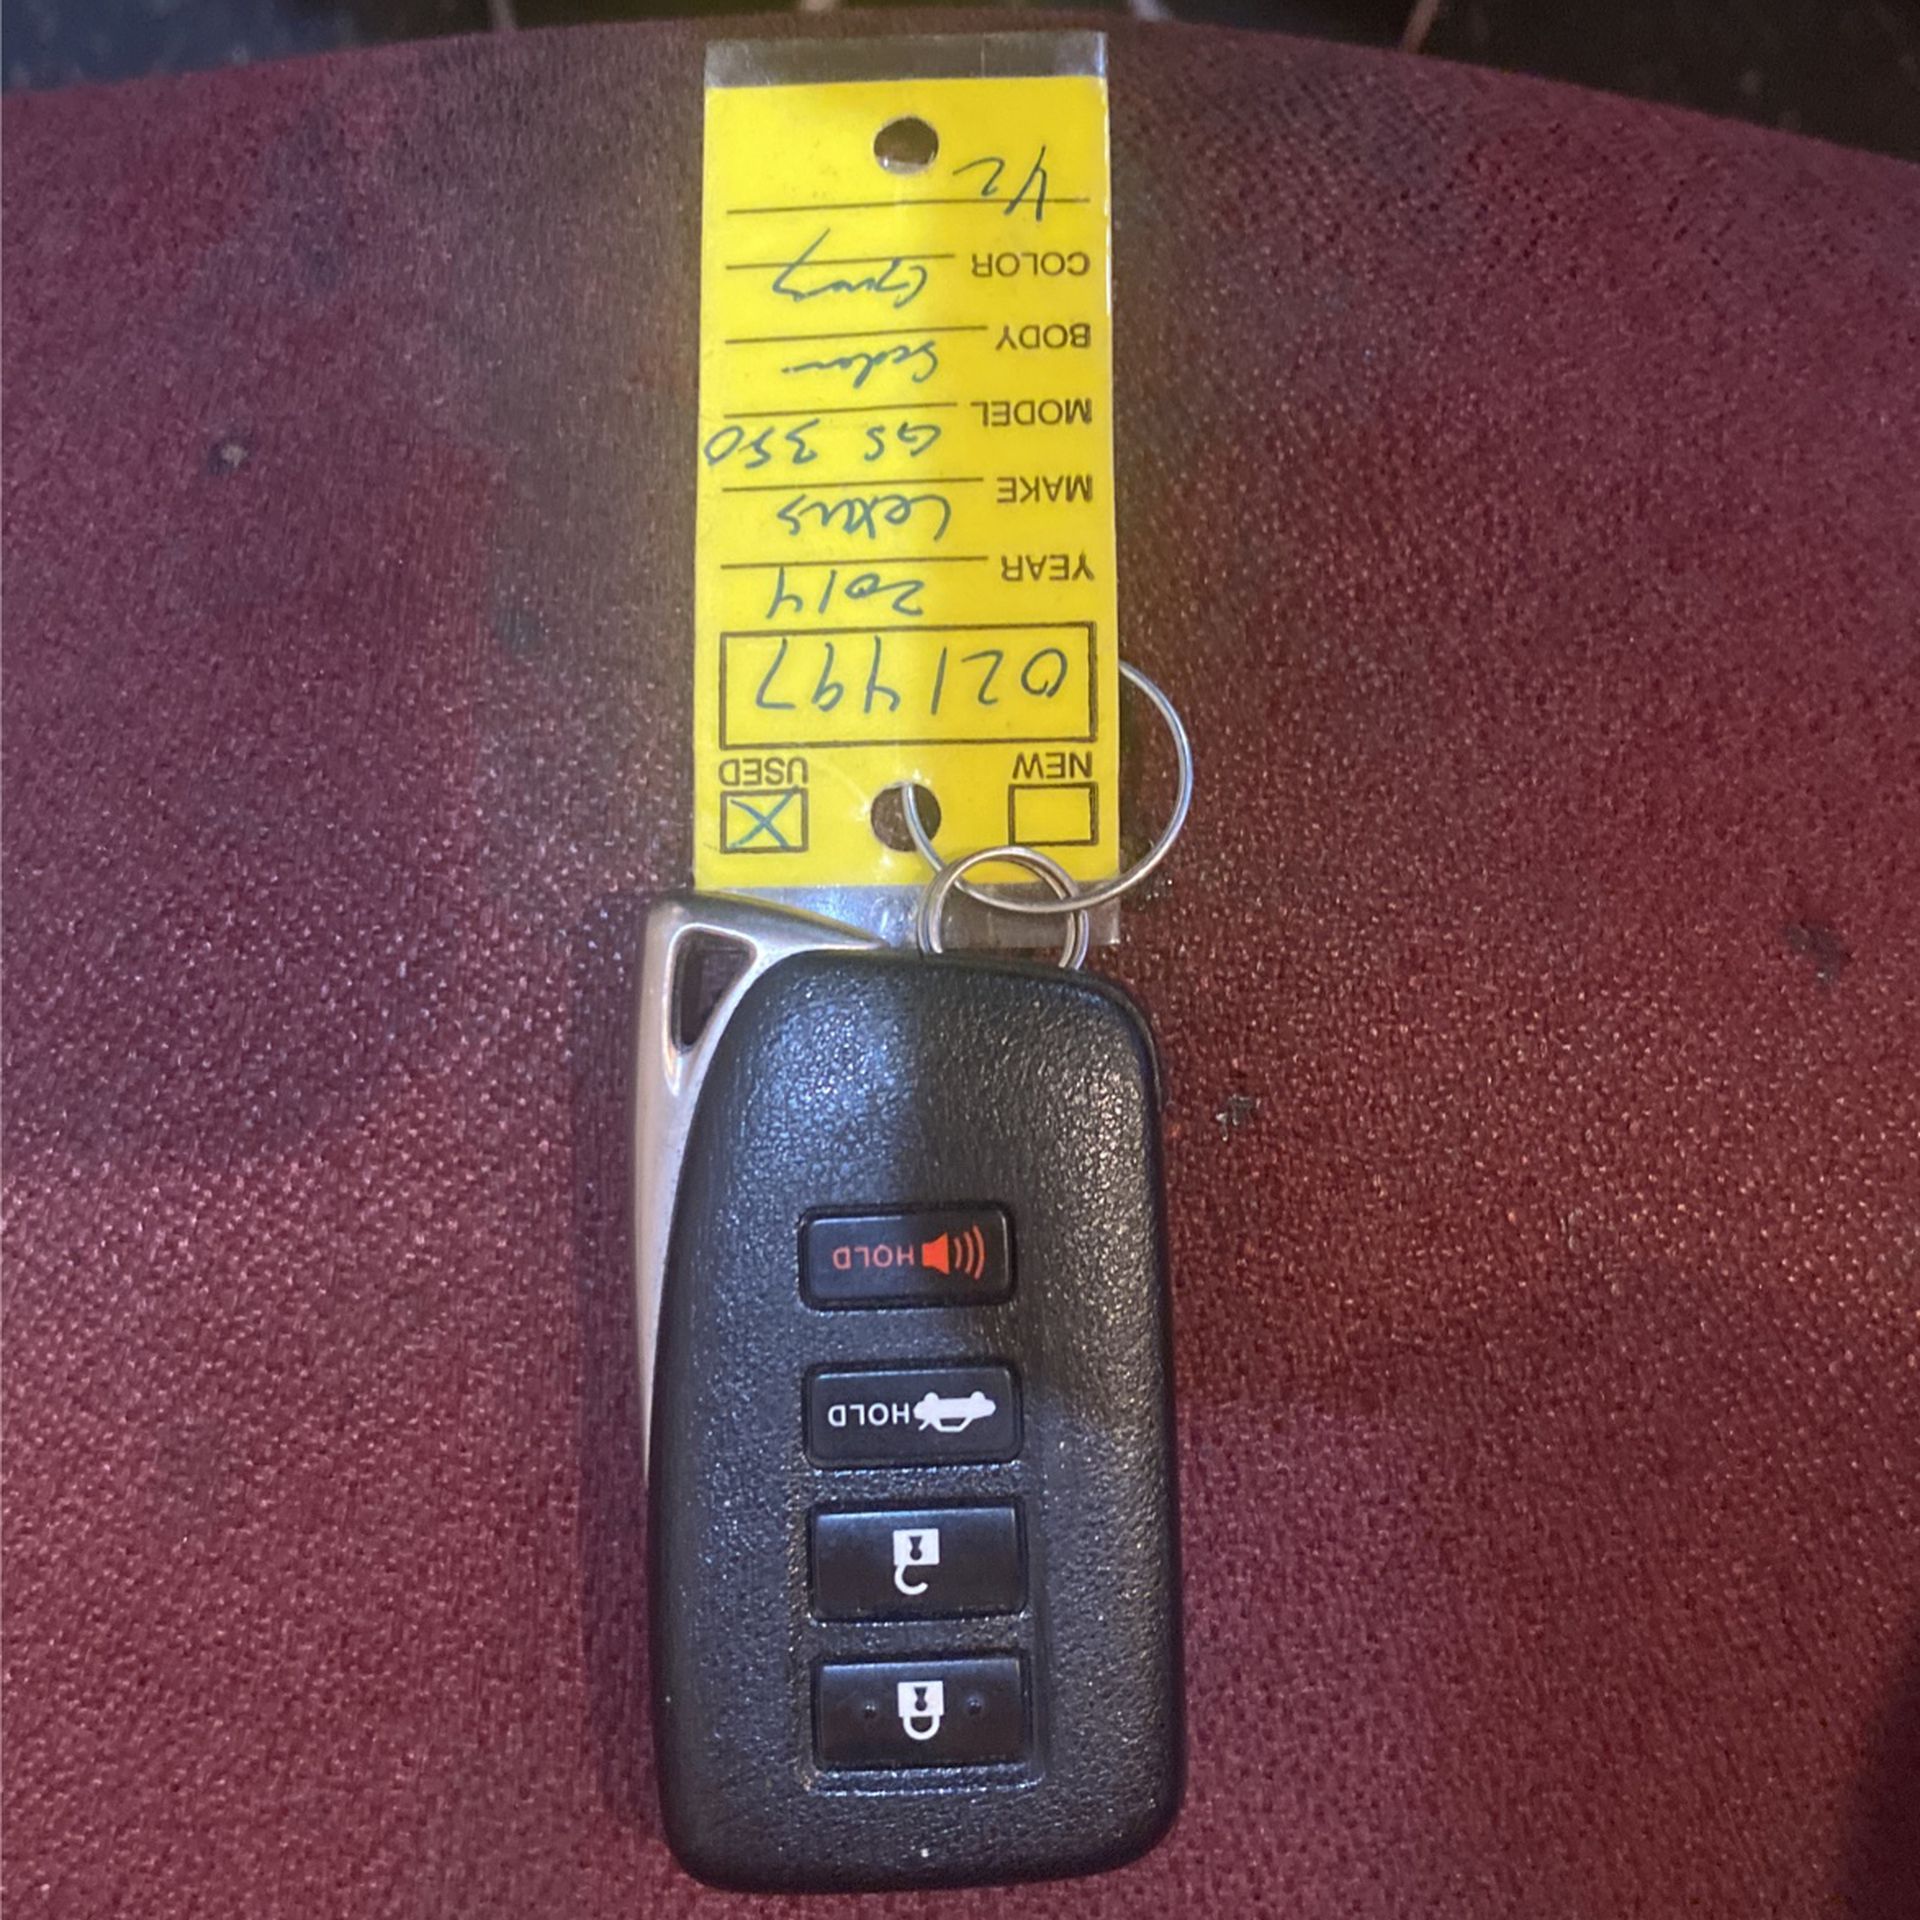 New Never Used 2014 Lexus GS350 Key Fob